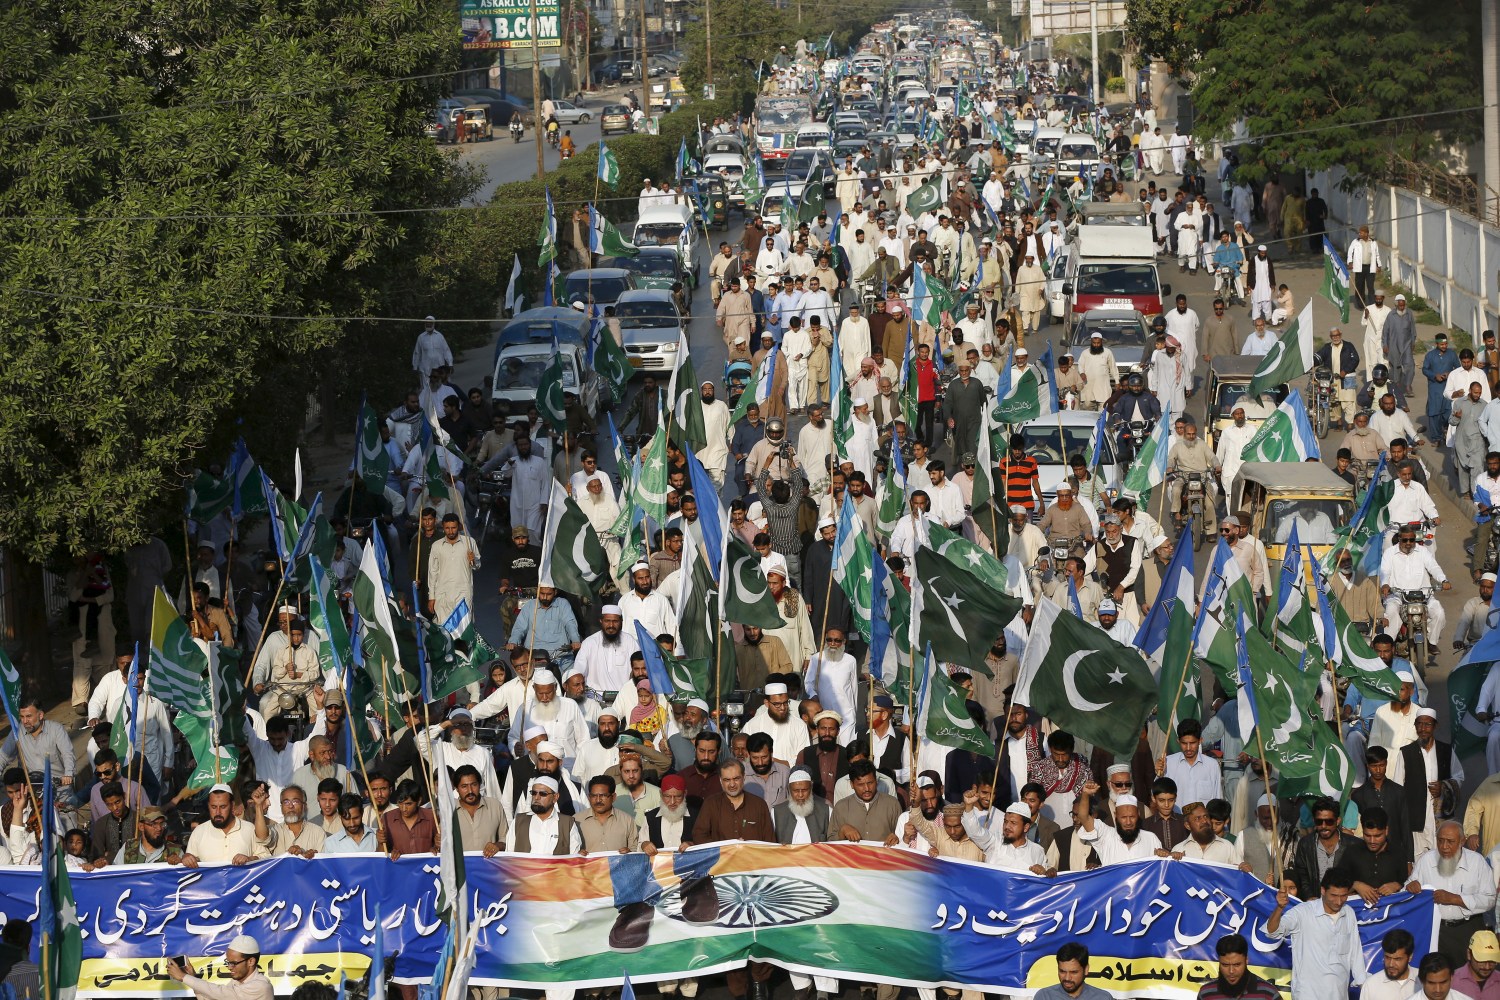 Supporters of the Jamaat-e-Islami political party hold flags as they march during a rally to mark Kashmir Solidarity Day, in Karachi, Pakistan February 5, 2016. REUTERS/Akhtar Soomro - RTX25LYM